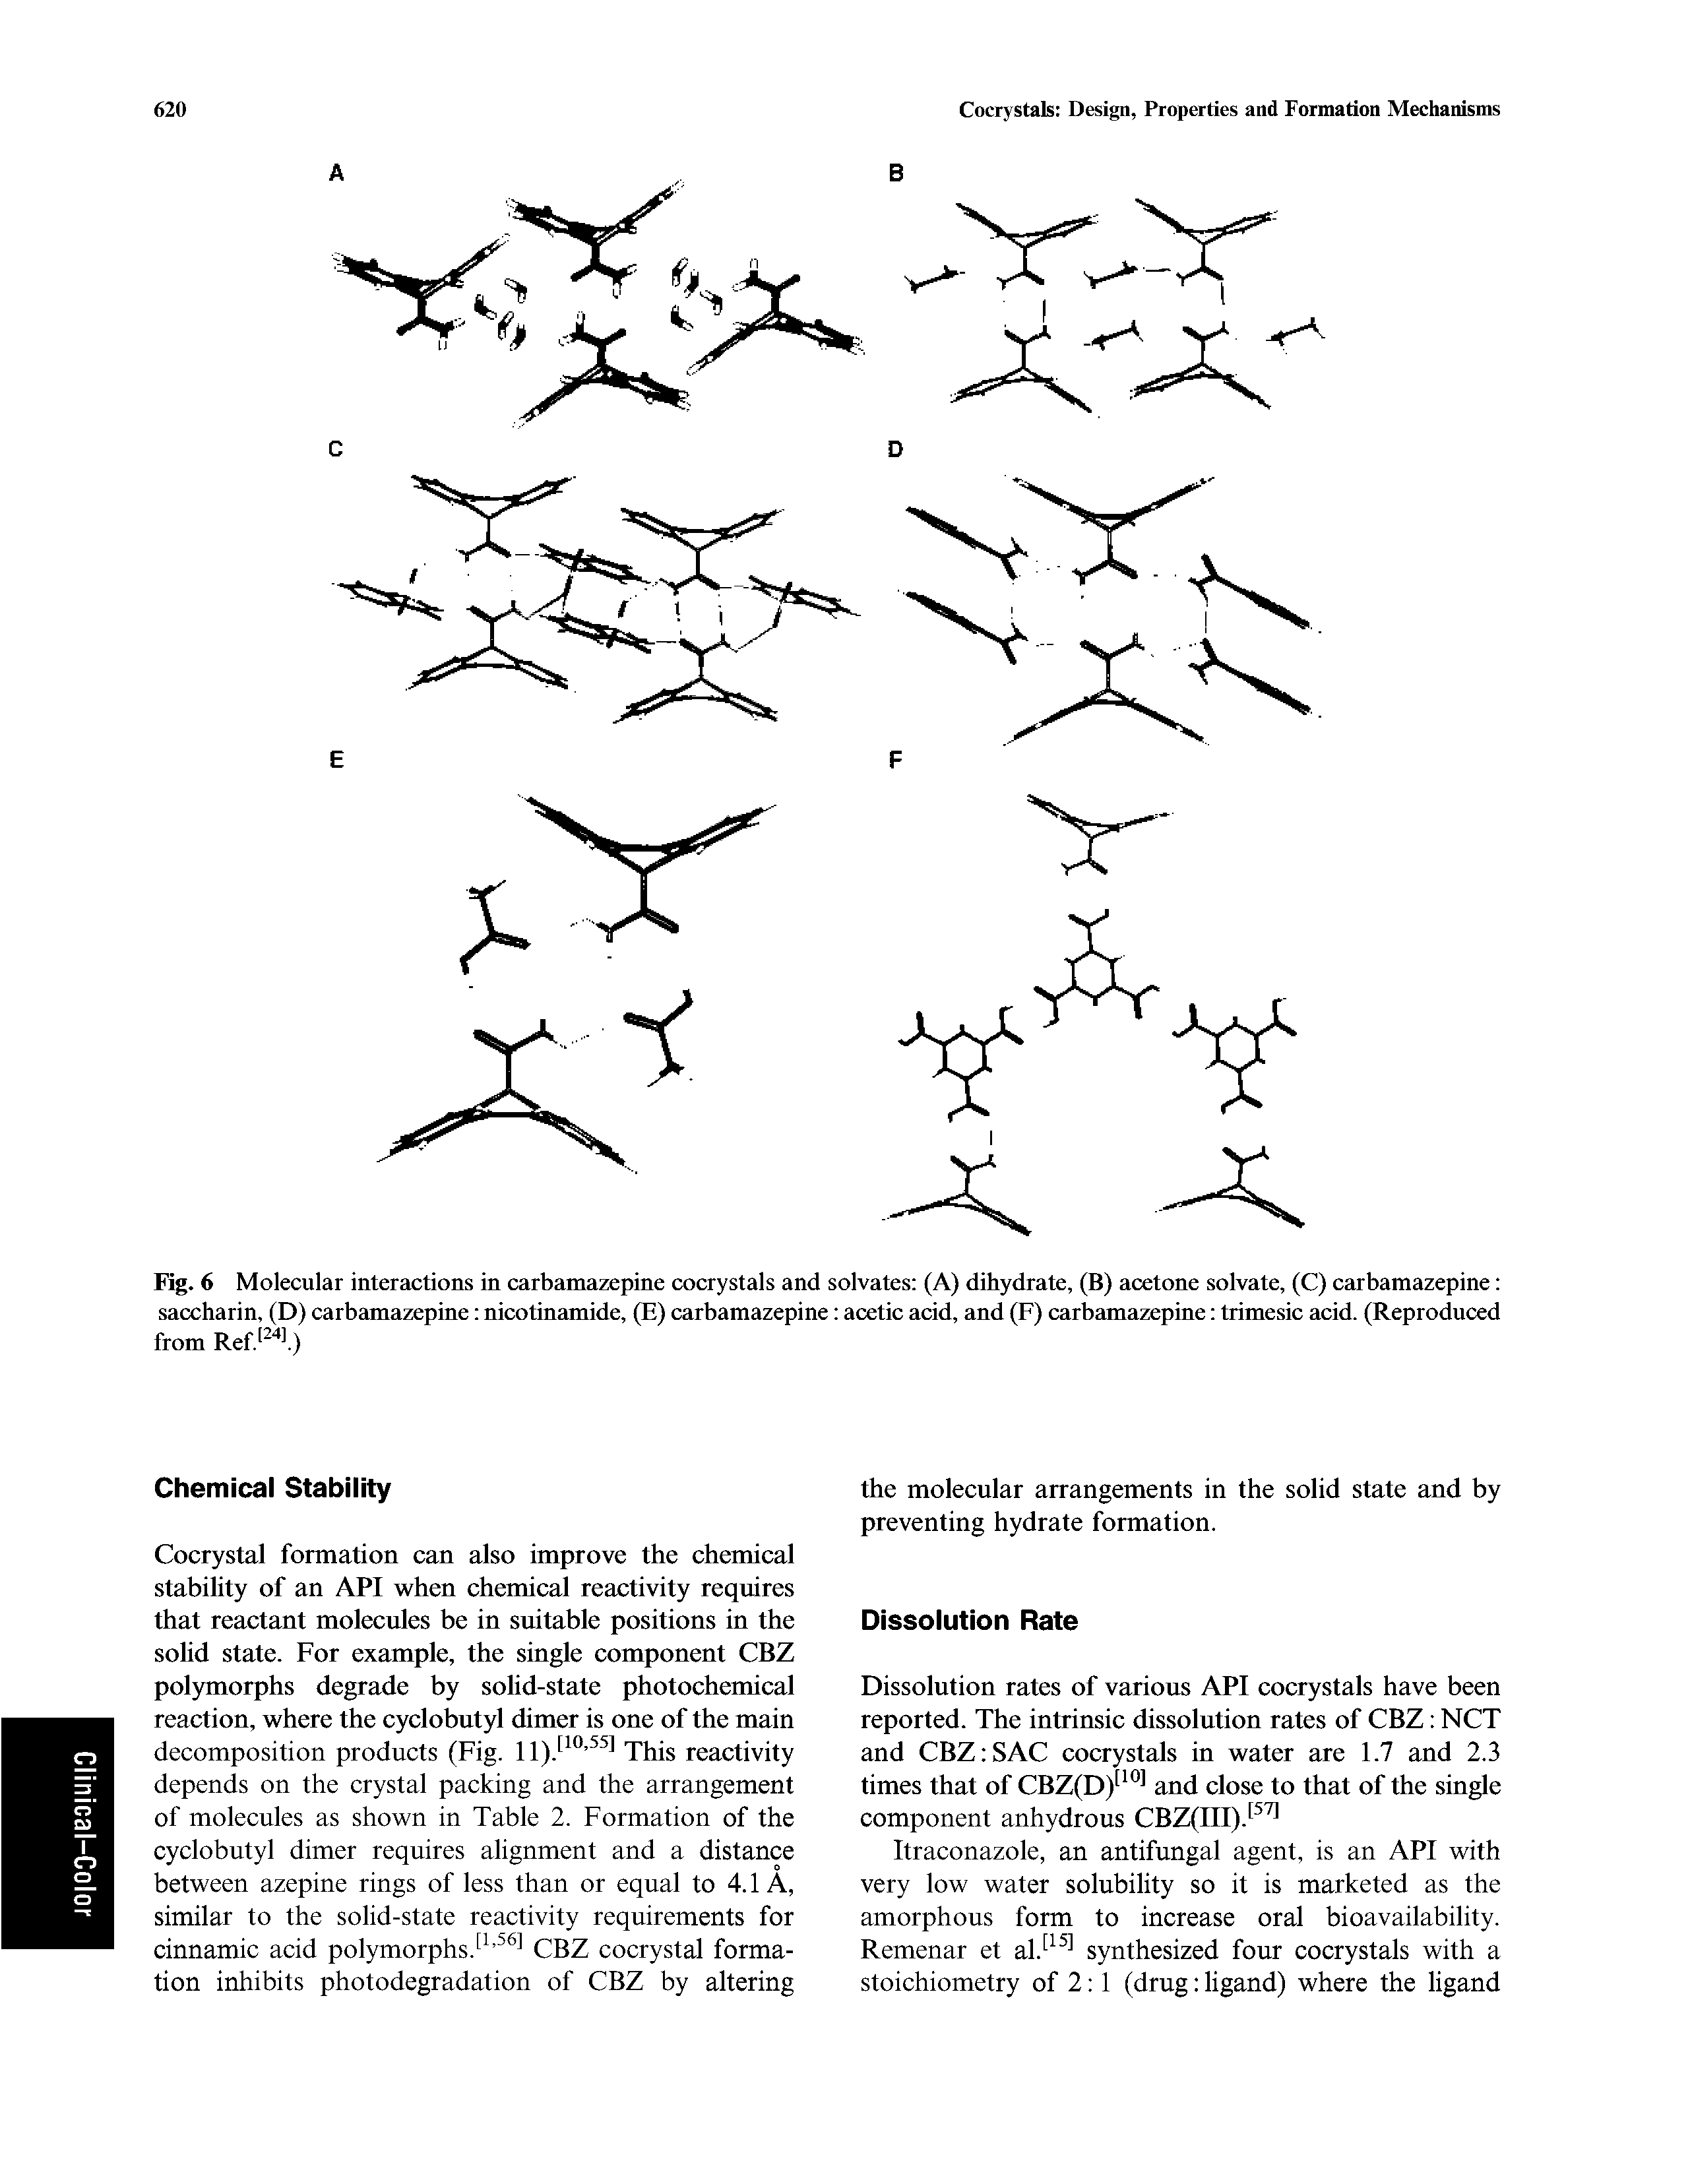 Fig. 6 Molecular interactions in carbamazepine cocrystals and solvates (A) dihydrate, (B) acetone solvate, (C) carbamazepine saccharin, (D) carbamazepine nicotinamide, (E) carbamazepine acetic acid, and (F) carbamazepine trimesic acid. (Reproduced from Ref...